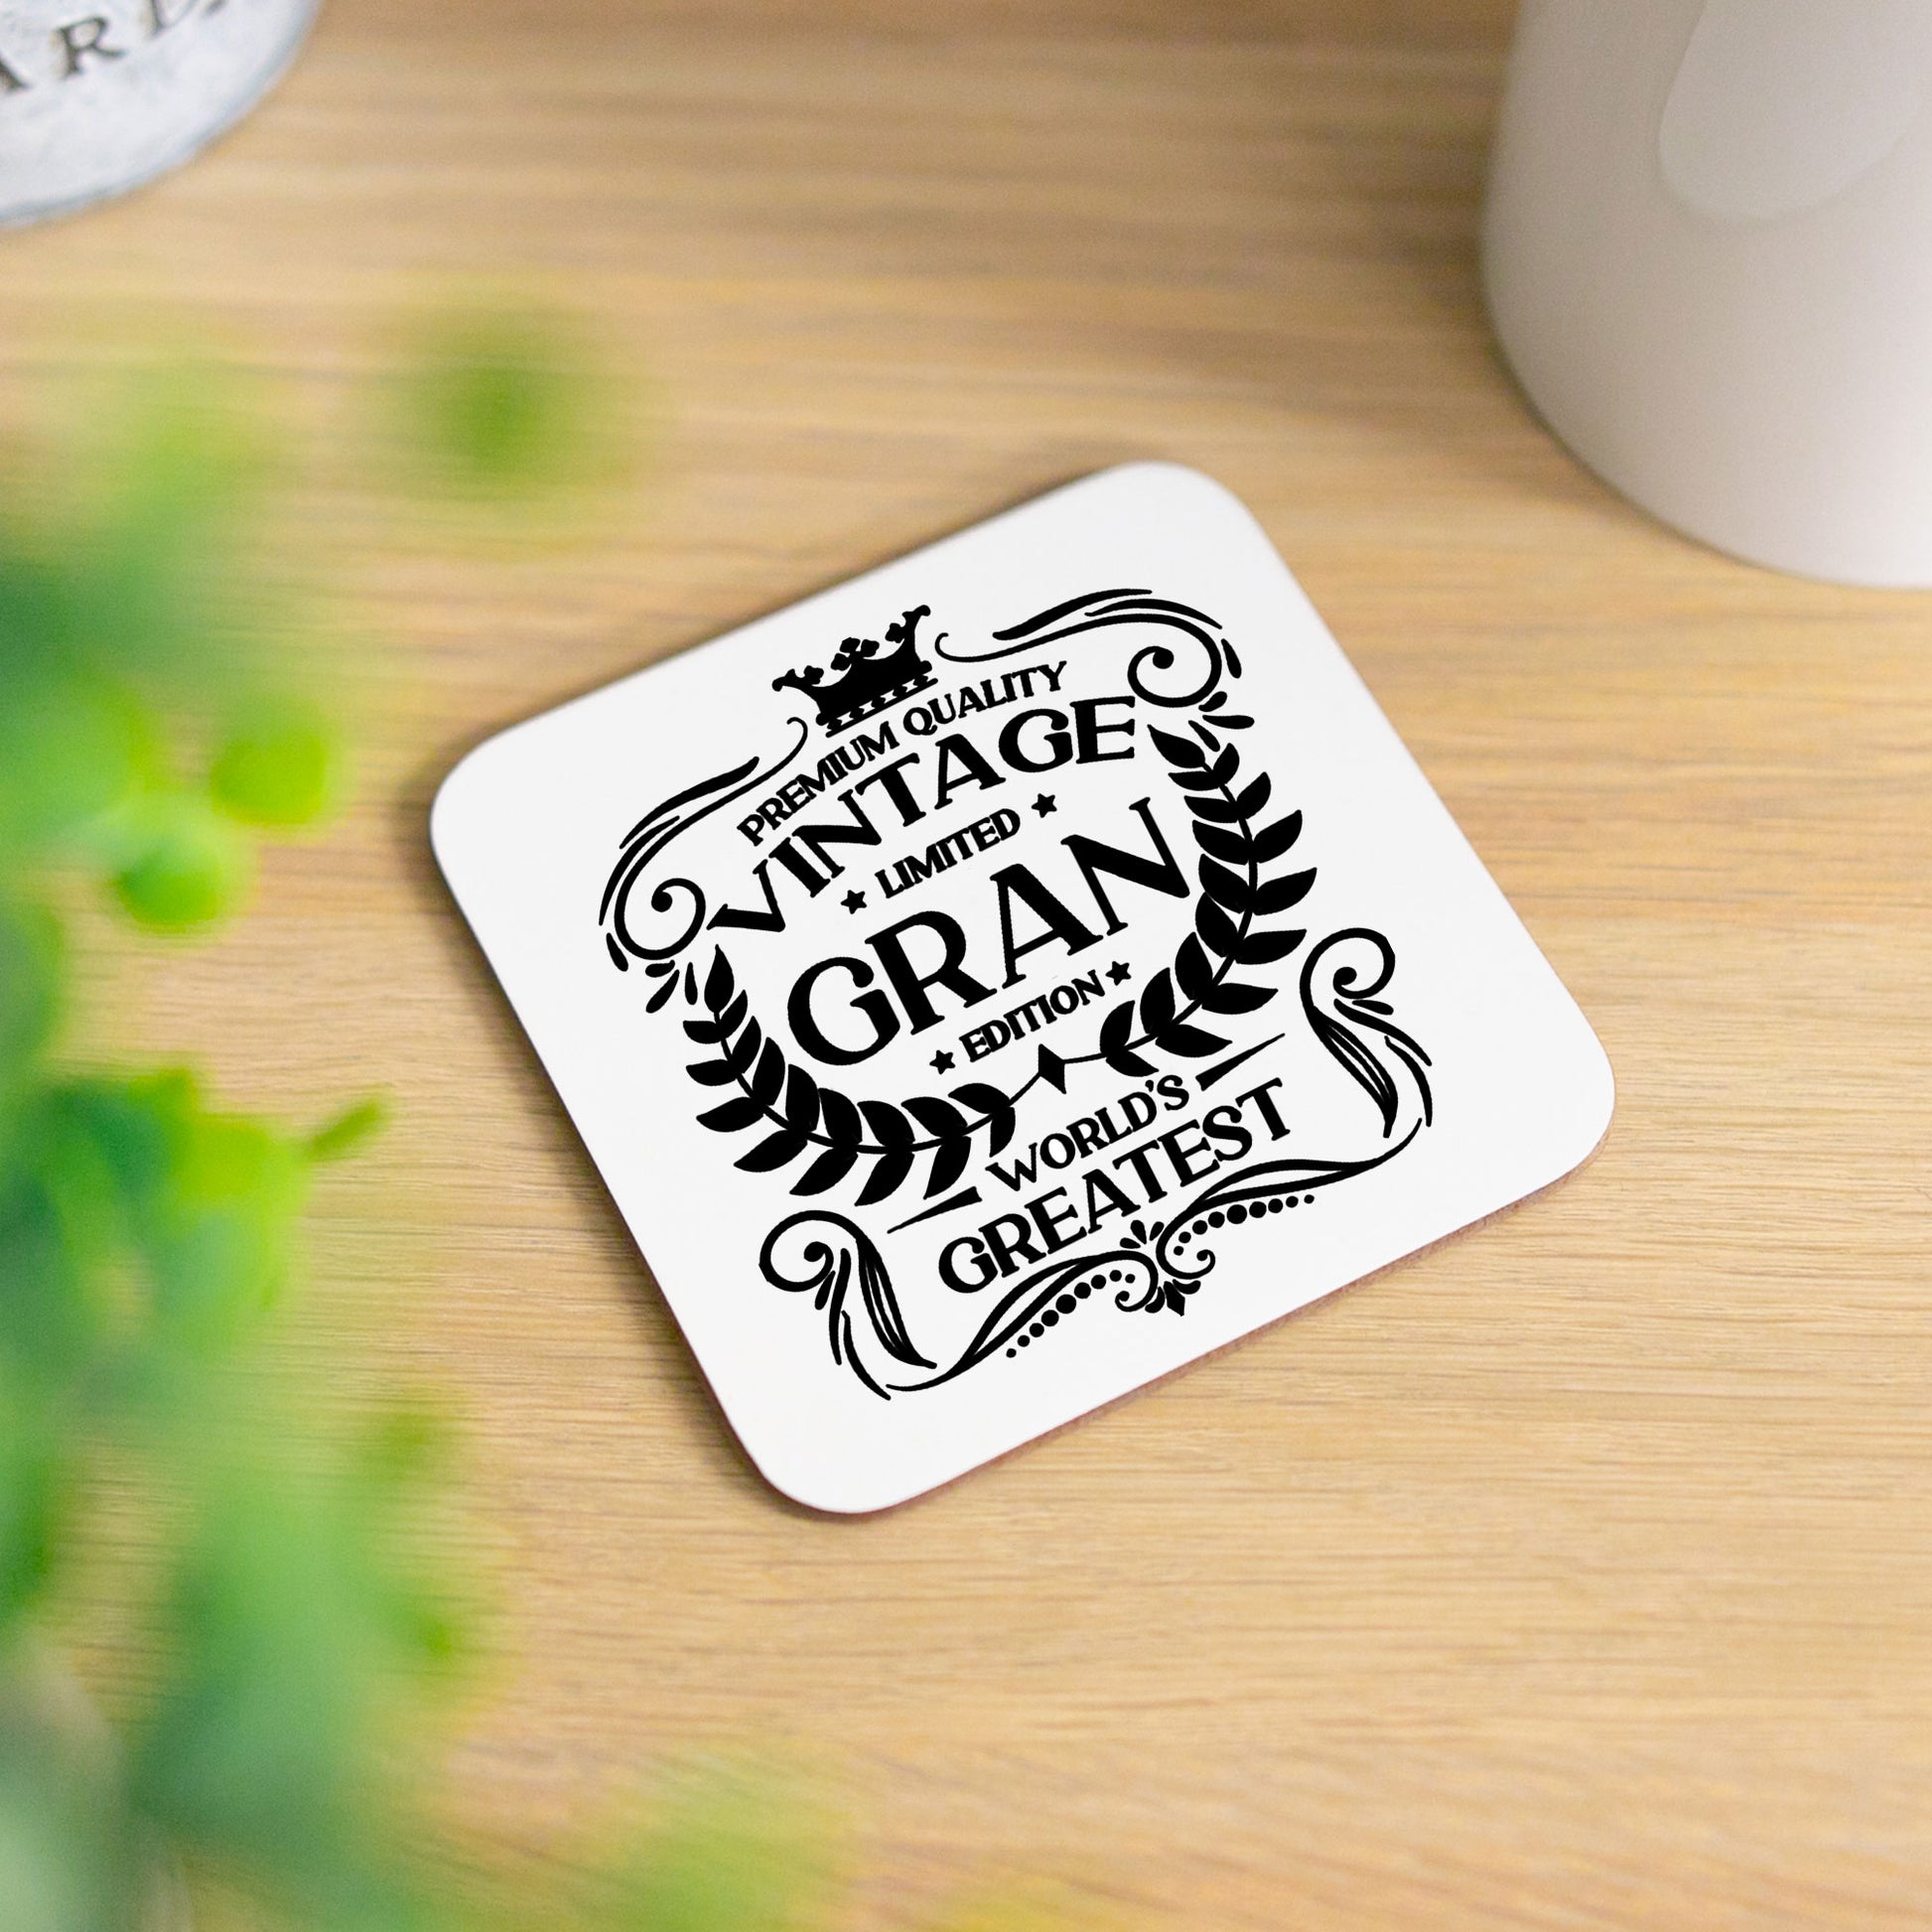 Vintage World's Greatest Gran Engraved Gin Glass Gift  - Always Looking Good - Glass & Printed Coaster  